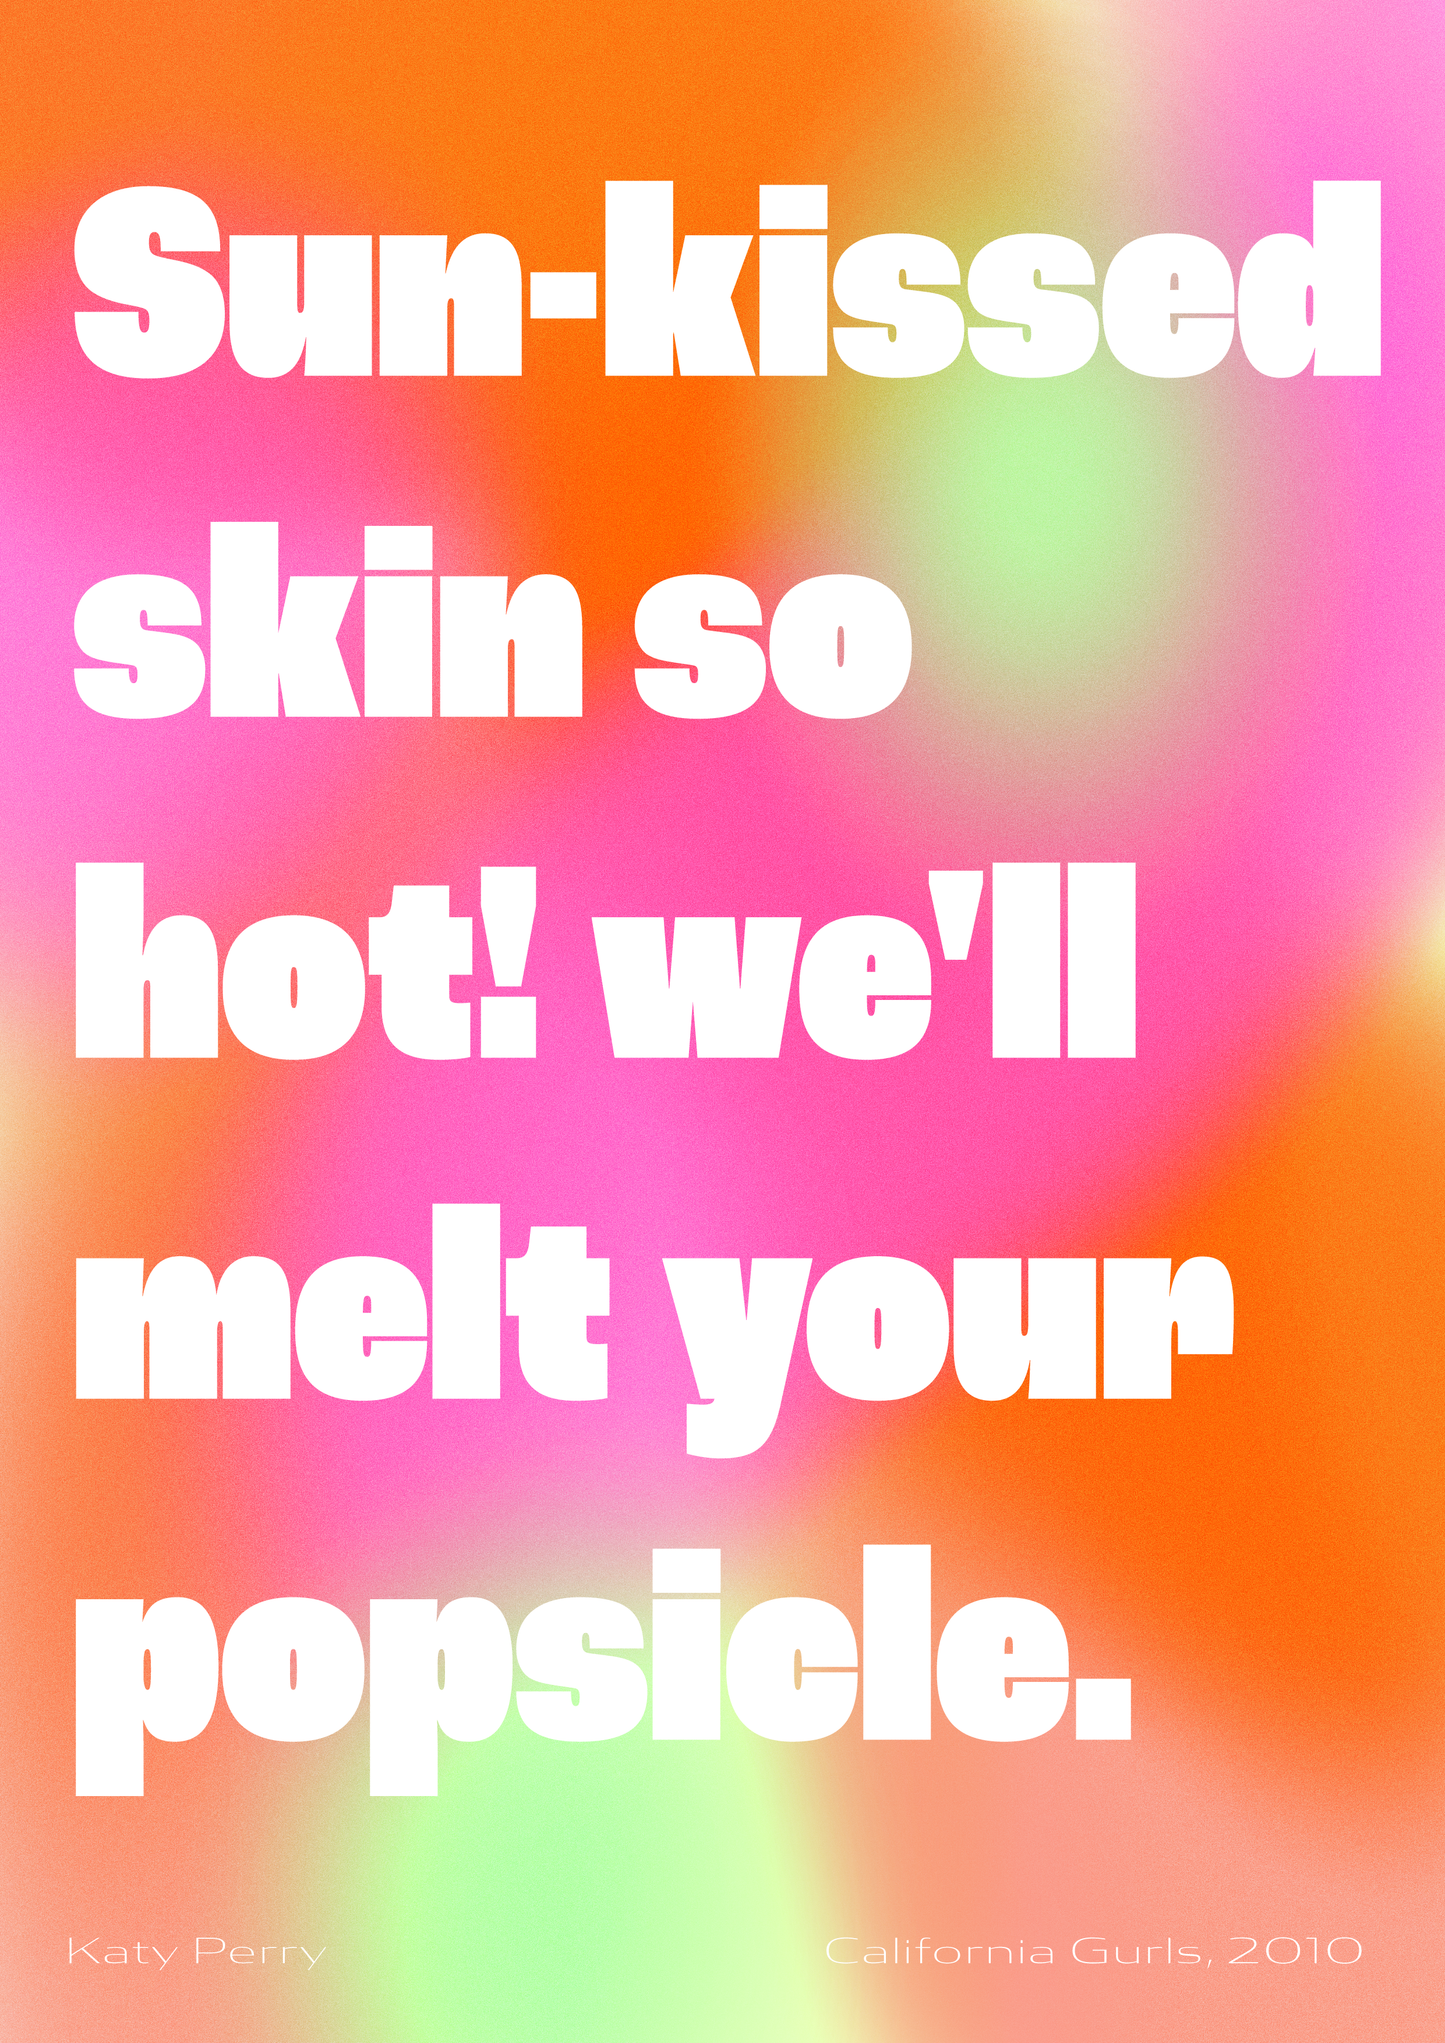 Sun-kissed skin so hot, we'll melt your popsicle! - Katy Perry print